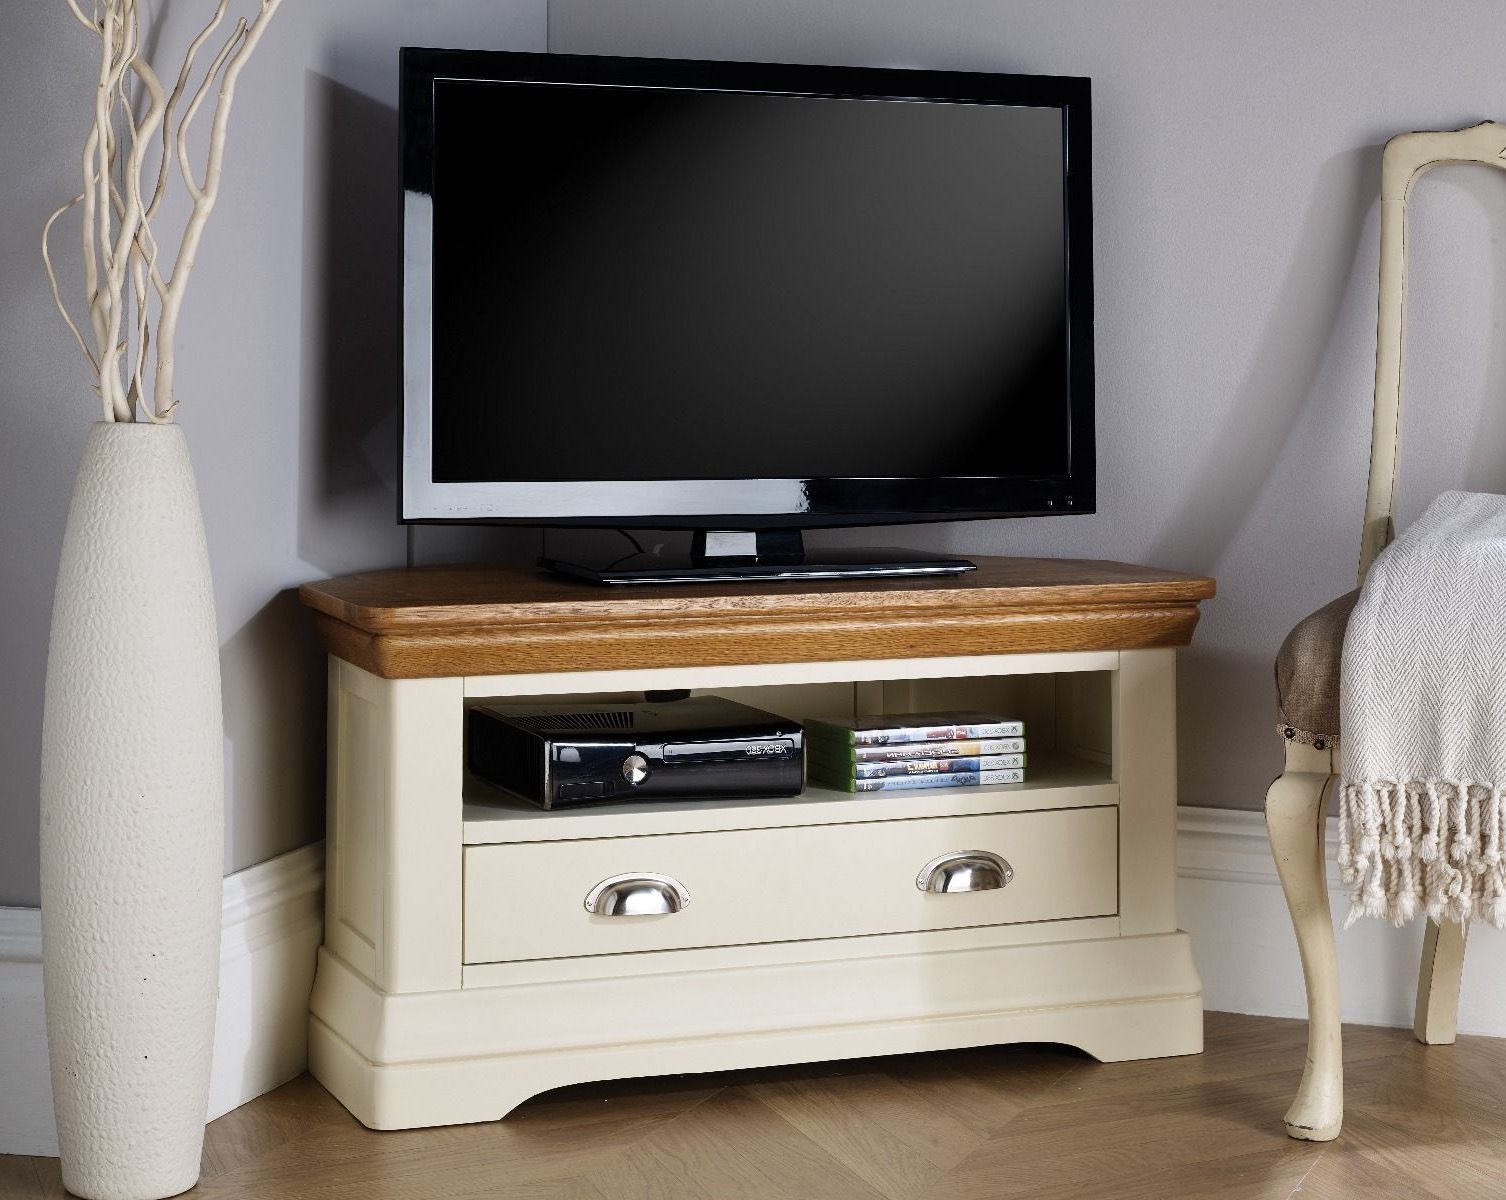 Corner Compton Ivory Large Tv Stands (View 3 of 7)